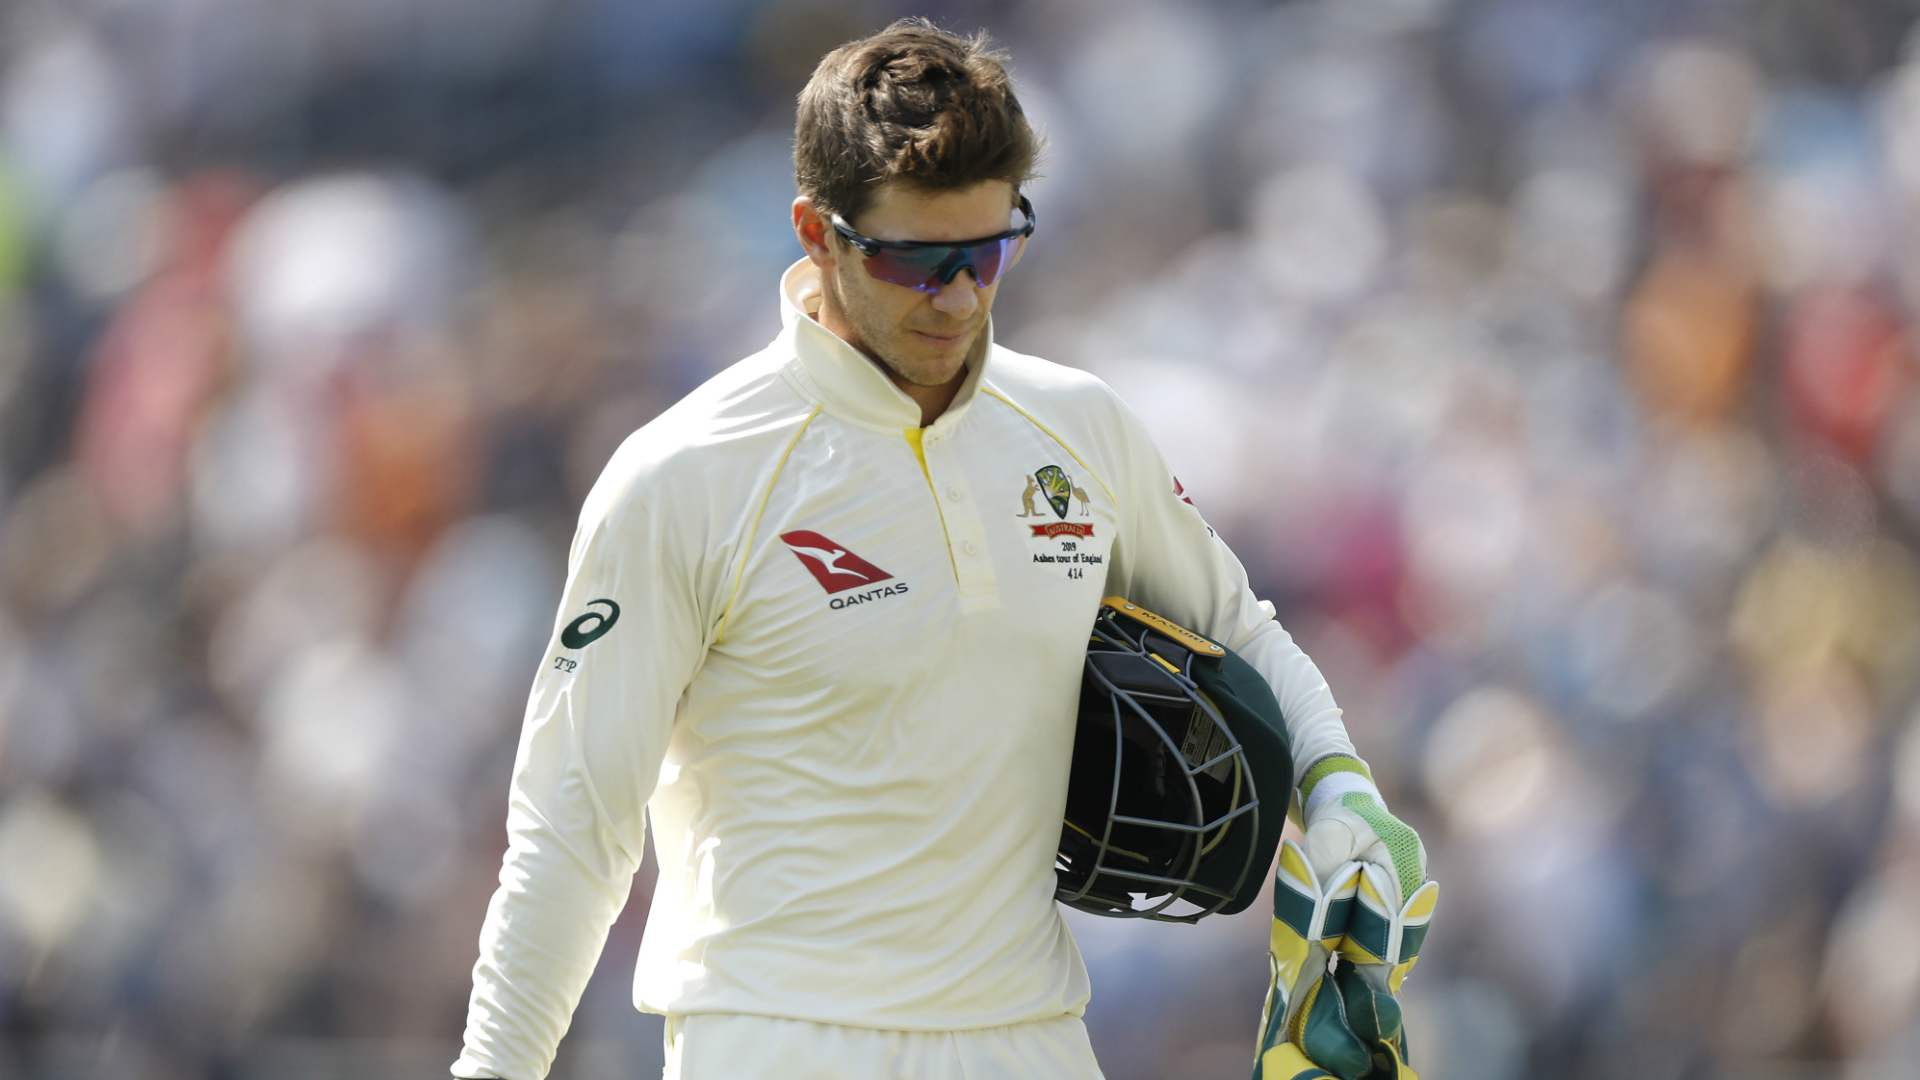 A clearly disappointed Tim Paine was gracious in defeat after Ben Stokes' heroics saw England level the Ashes against Australia.